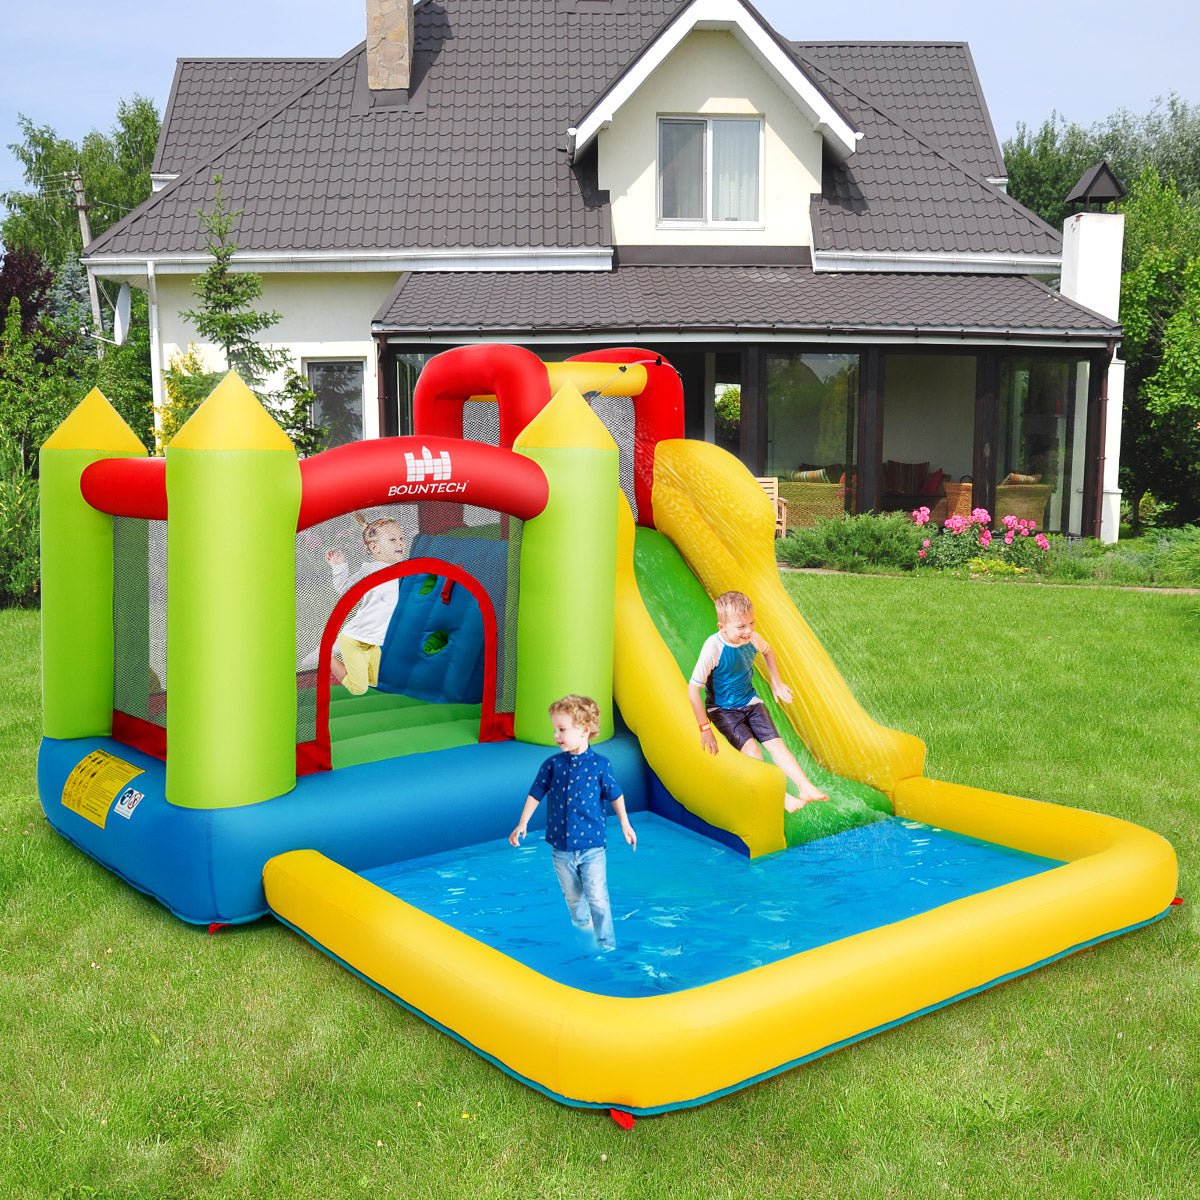 Inflatable Jumping Castle with Water Slide & Splash Pool - Complete Set